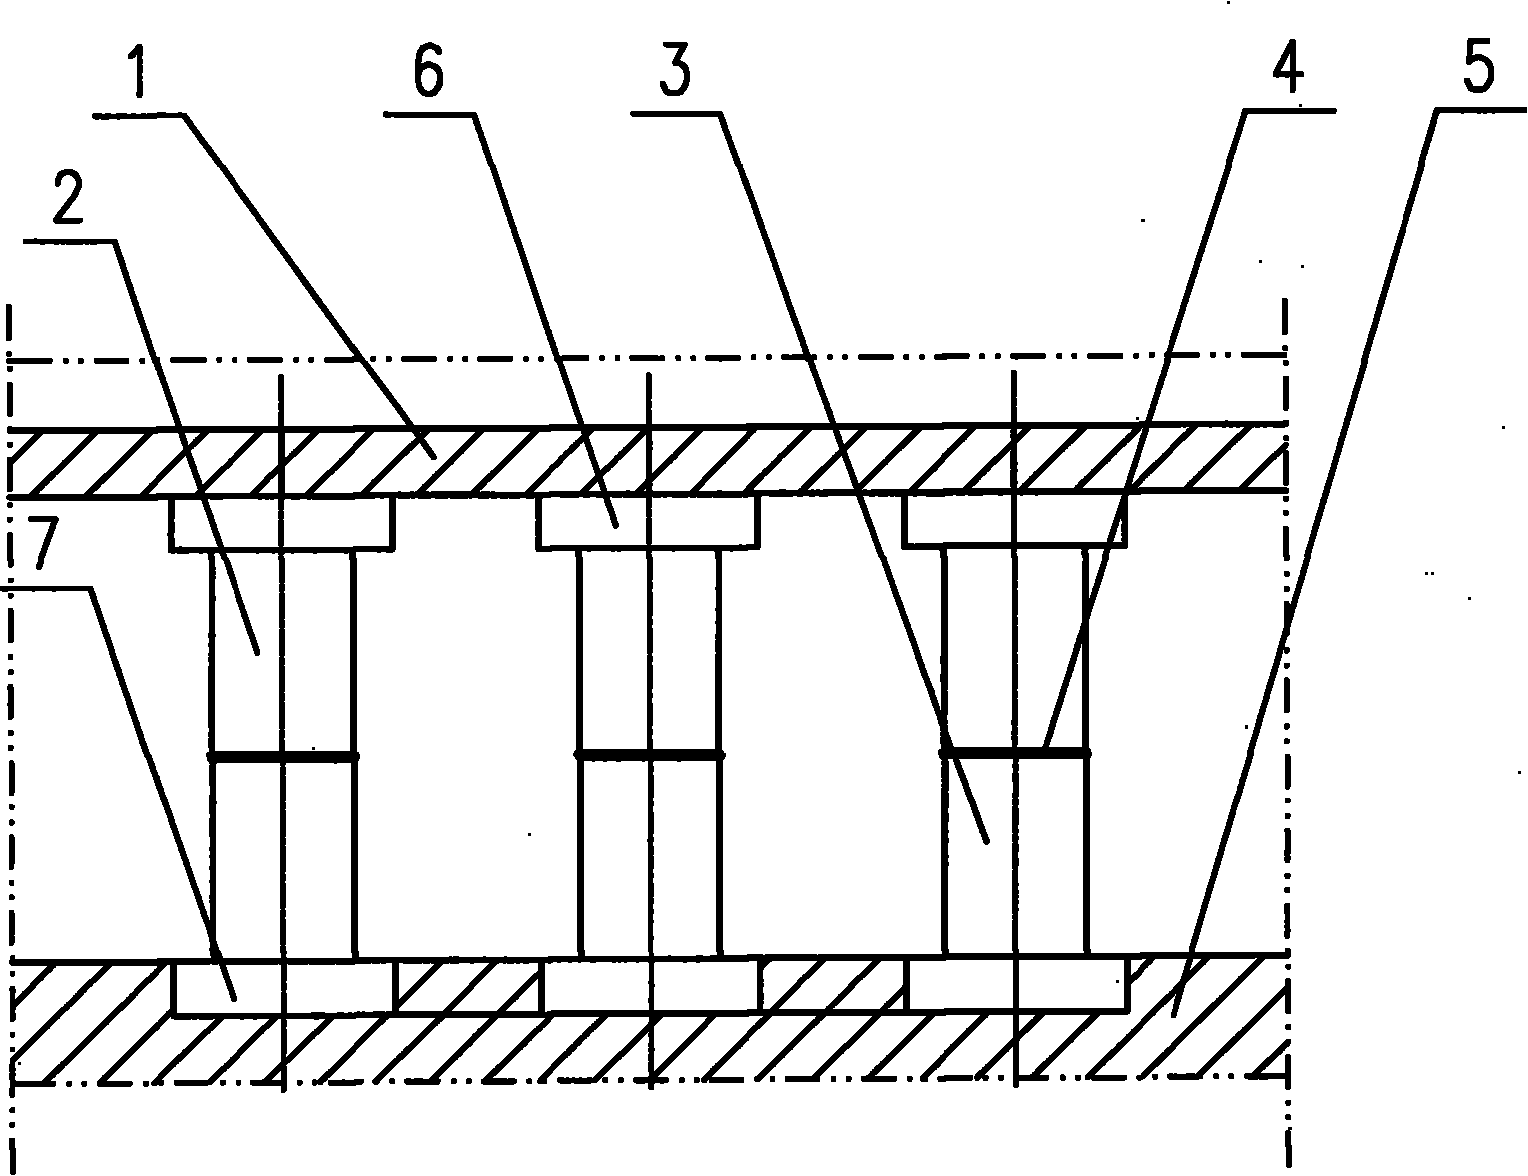 Bottom flue gas passage structure of electrode calcination furnace with cap